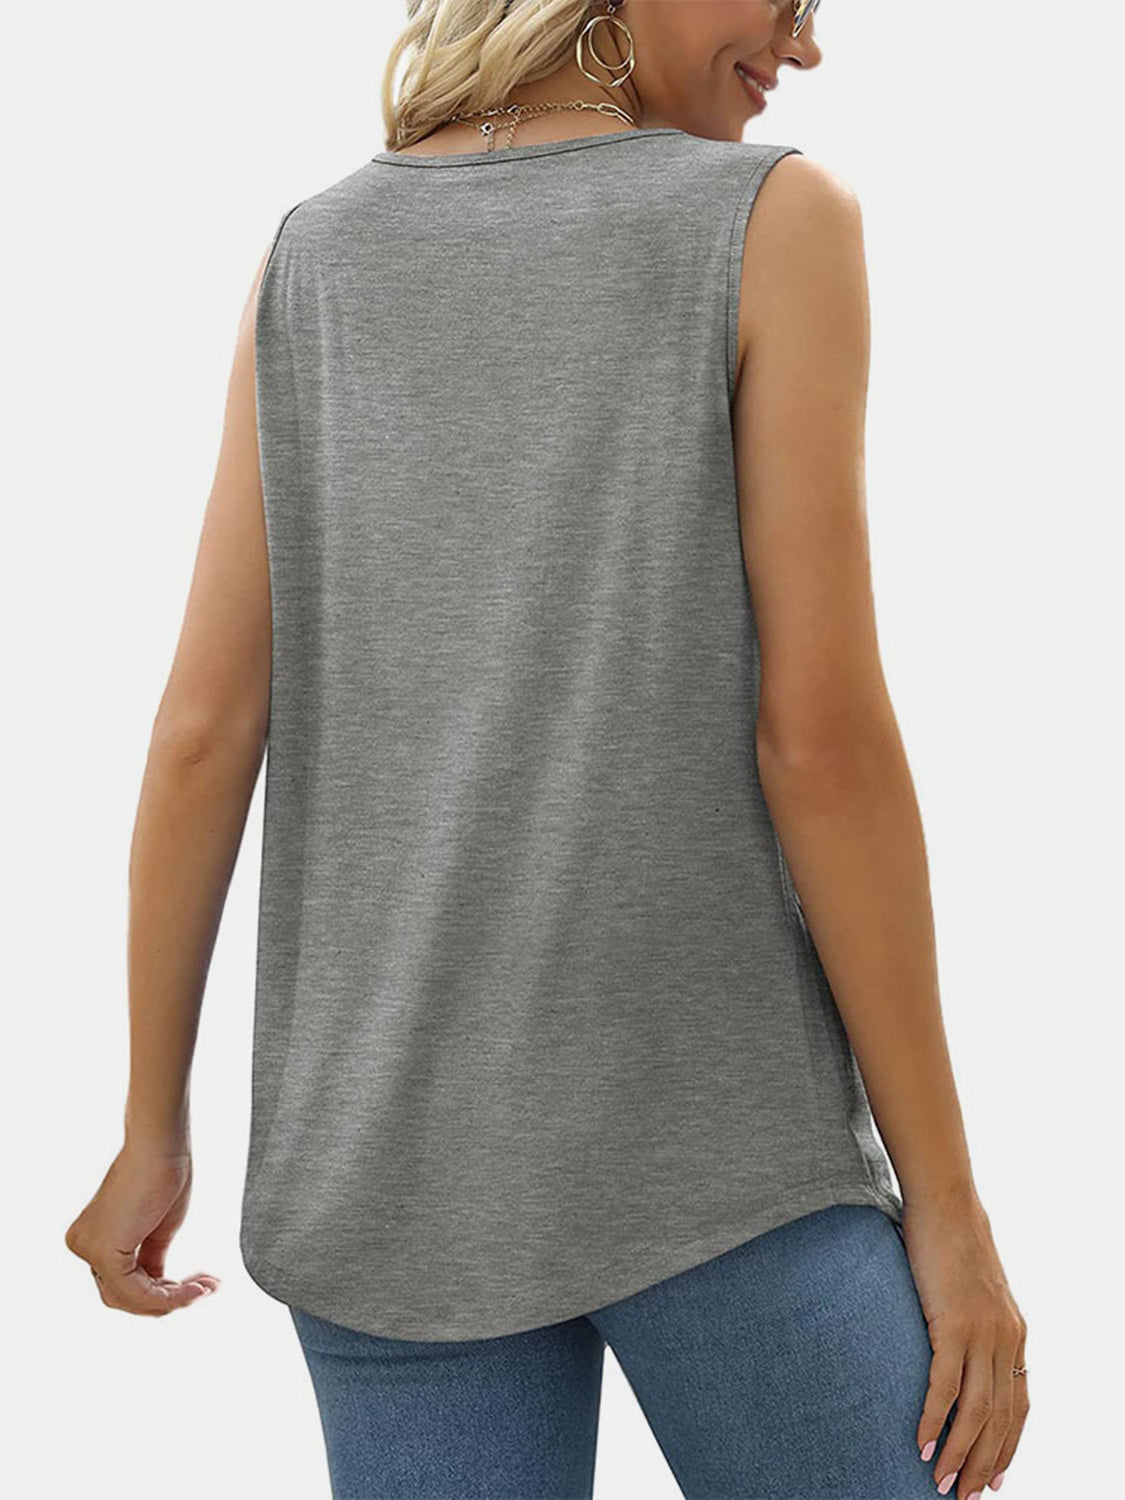 Chic Ruched Square Neck Tank in 6 colors. Perfect blend of style & comfort for any occasion. Elevate your wardrobe with this versatile top!